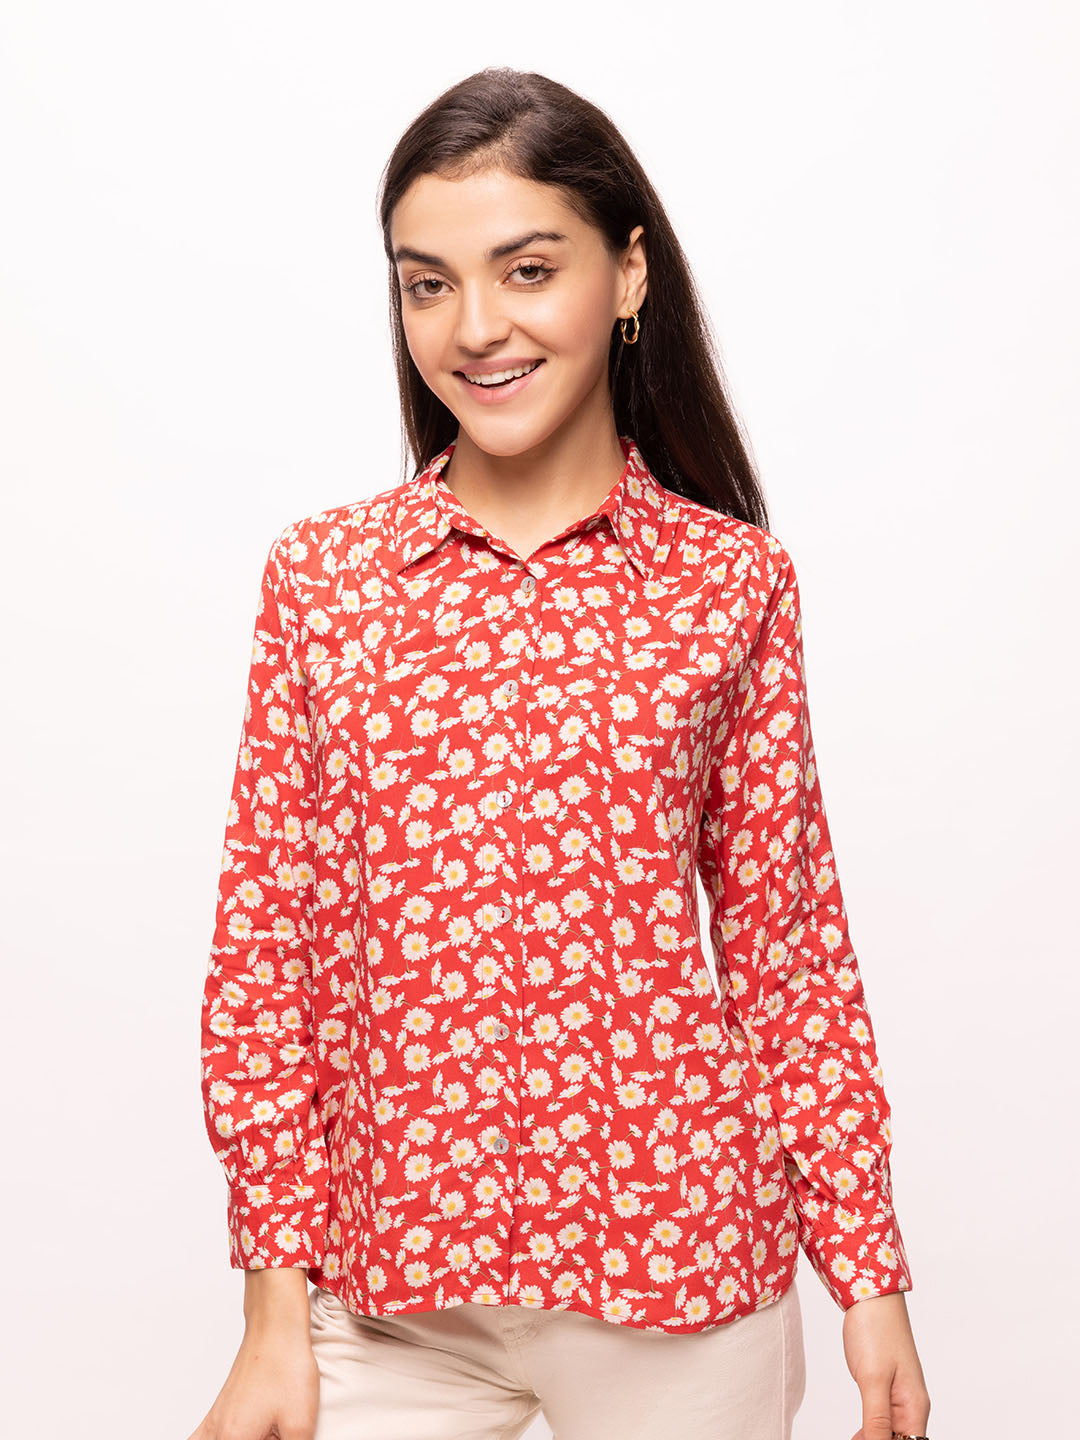 Bombay High Women's Cherry Red Full Sleeves Floral Print Relaxed Fit Shirt